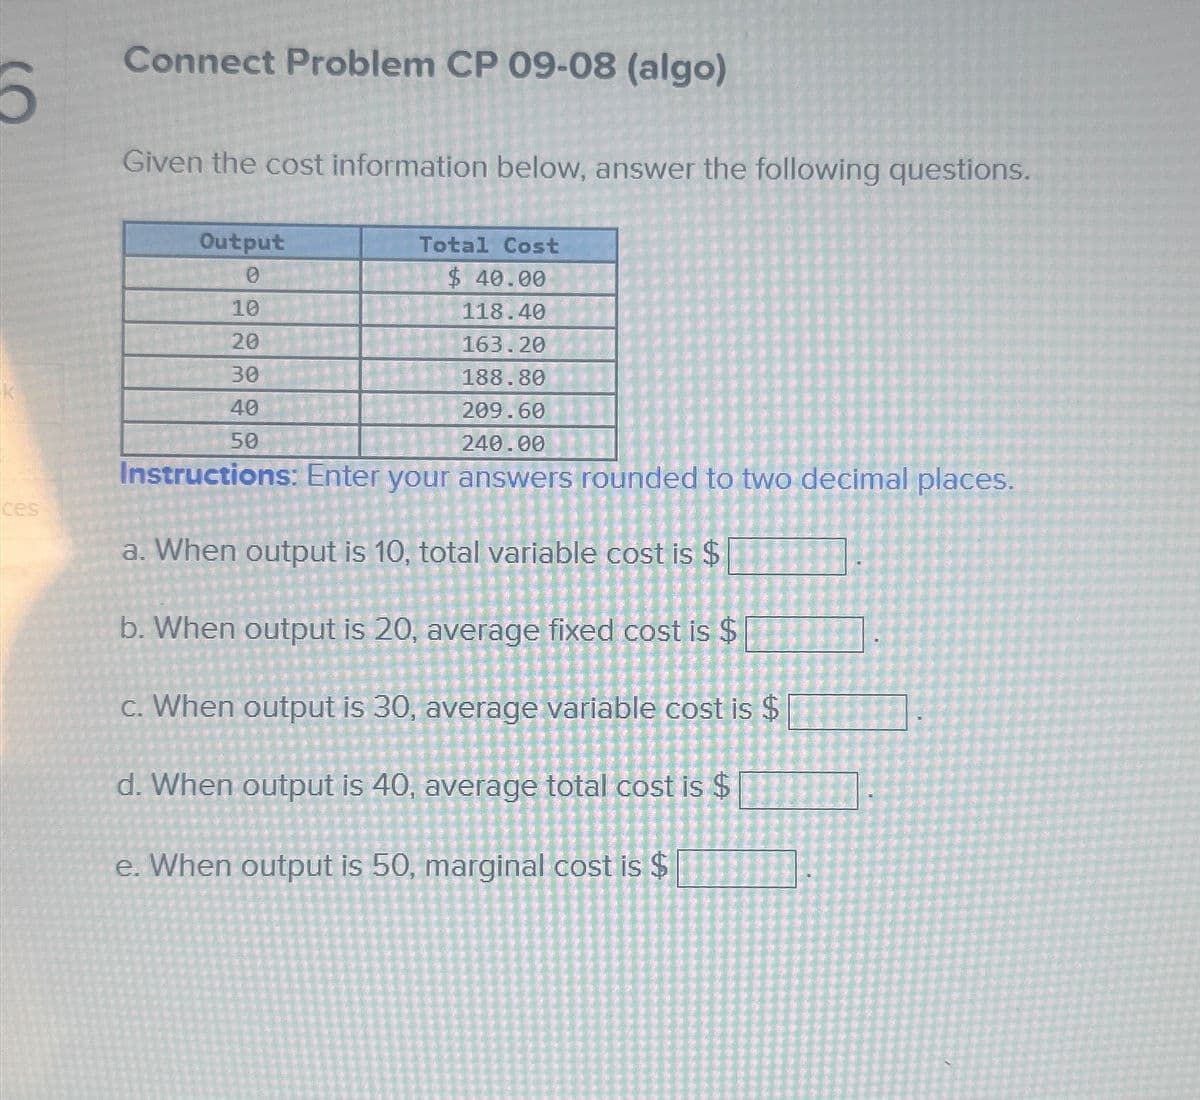 Б
ces
Connect Problem CP 09-08 (algo)
Given the cost information below, answer the following questions.
Output
0
10
20
30
40
50
Total Cost
$ 40.00
118.40
163.20
188.80
209.60
240.00
Instructions: Enter your answers rounded to two decimal places.
a. When output is 10, total variable cost is $
b. When output is 20, average fixed cost is $
c. When output is 30, average variable cost is $
d. When output is 40, average total cost is $
e. When output is 50, marginal cost is $